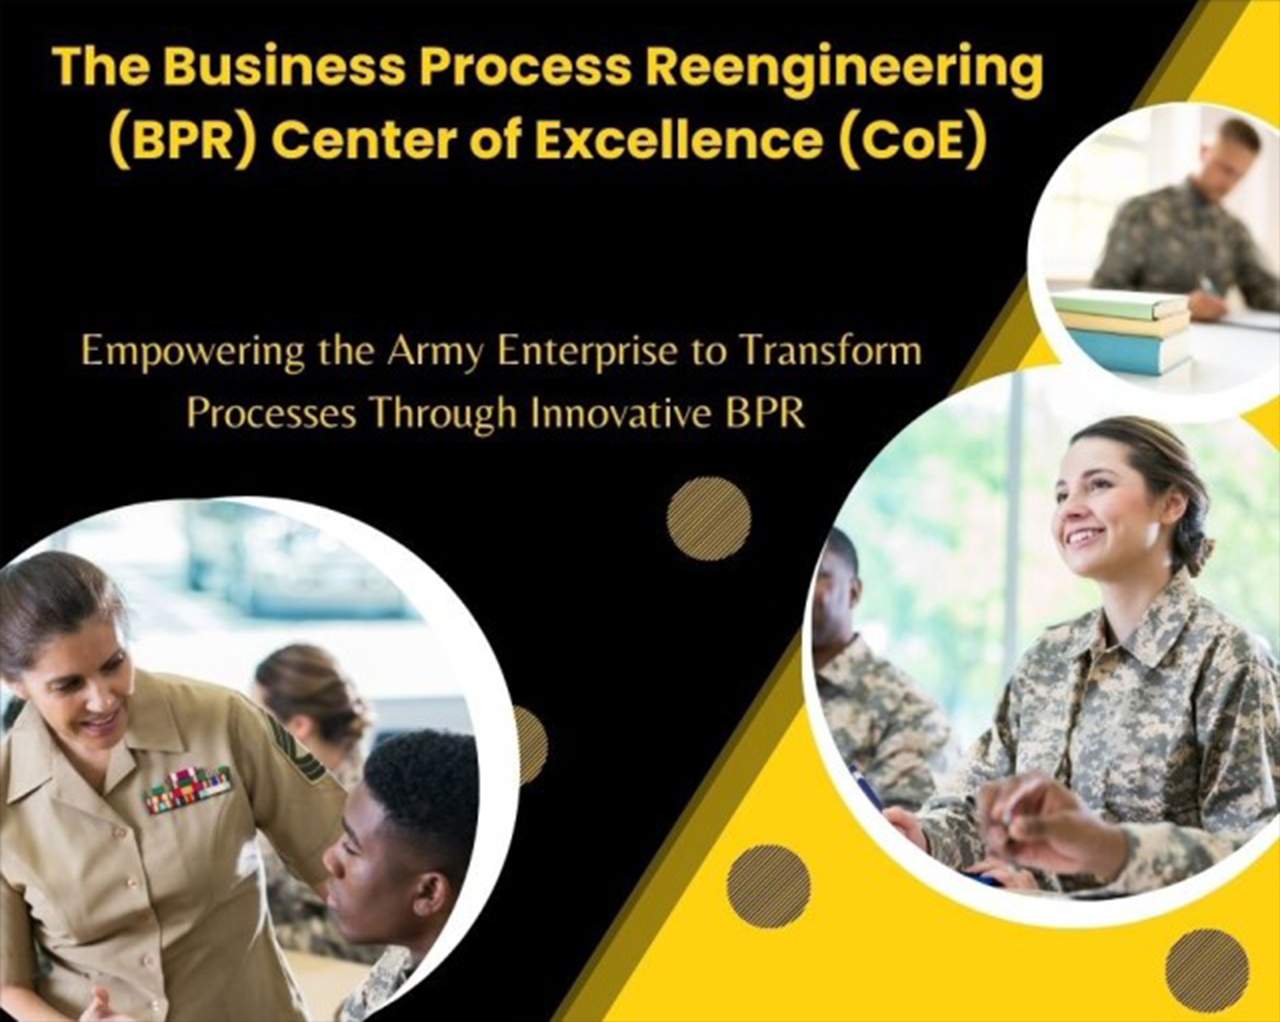 The Business Process Reenfineering(BPR) Center of Excellence(COE): Empowering the Army Enterprise to Transform Process Through Innovative BPR